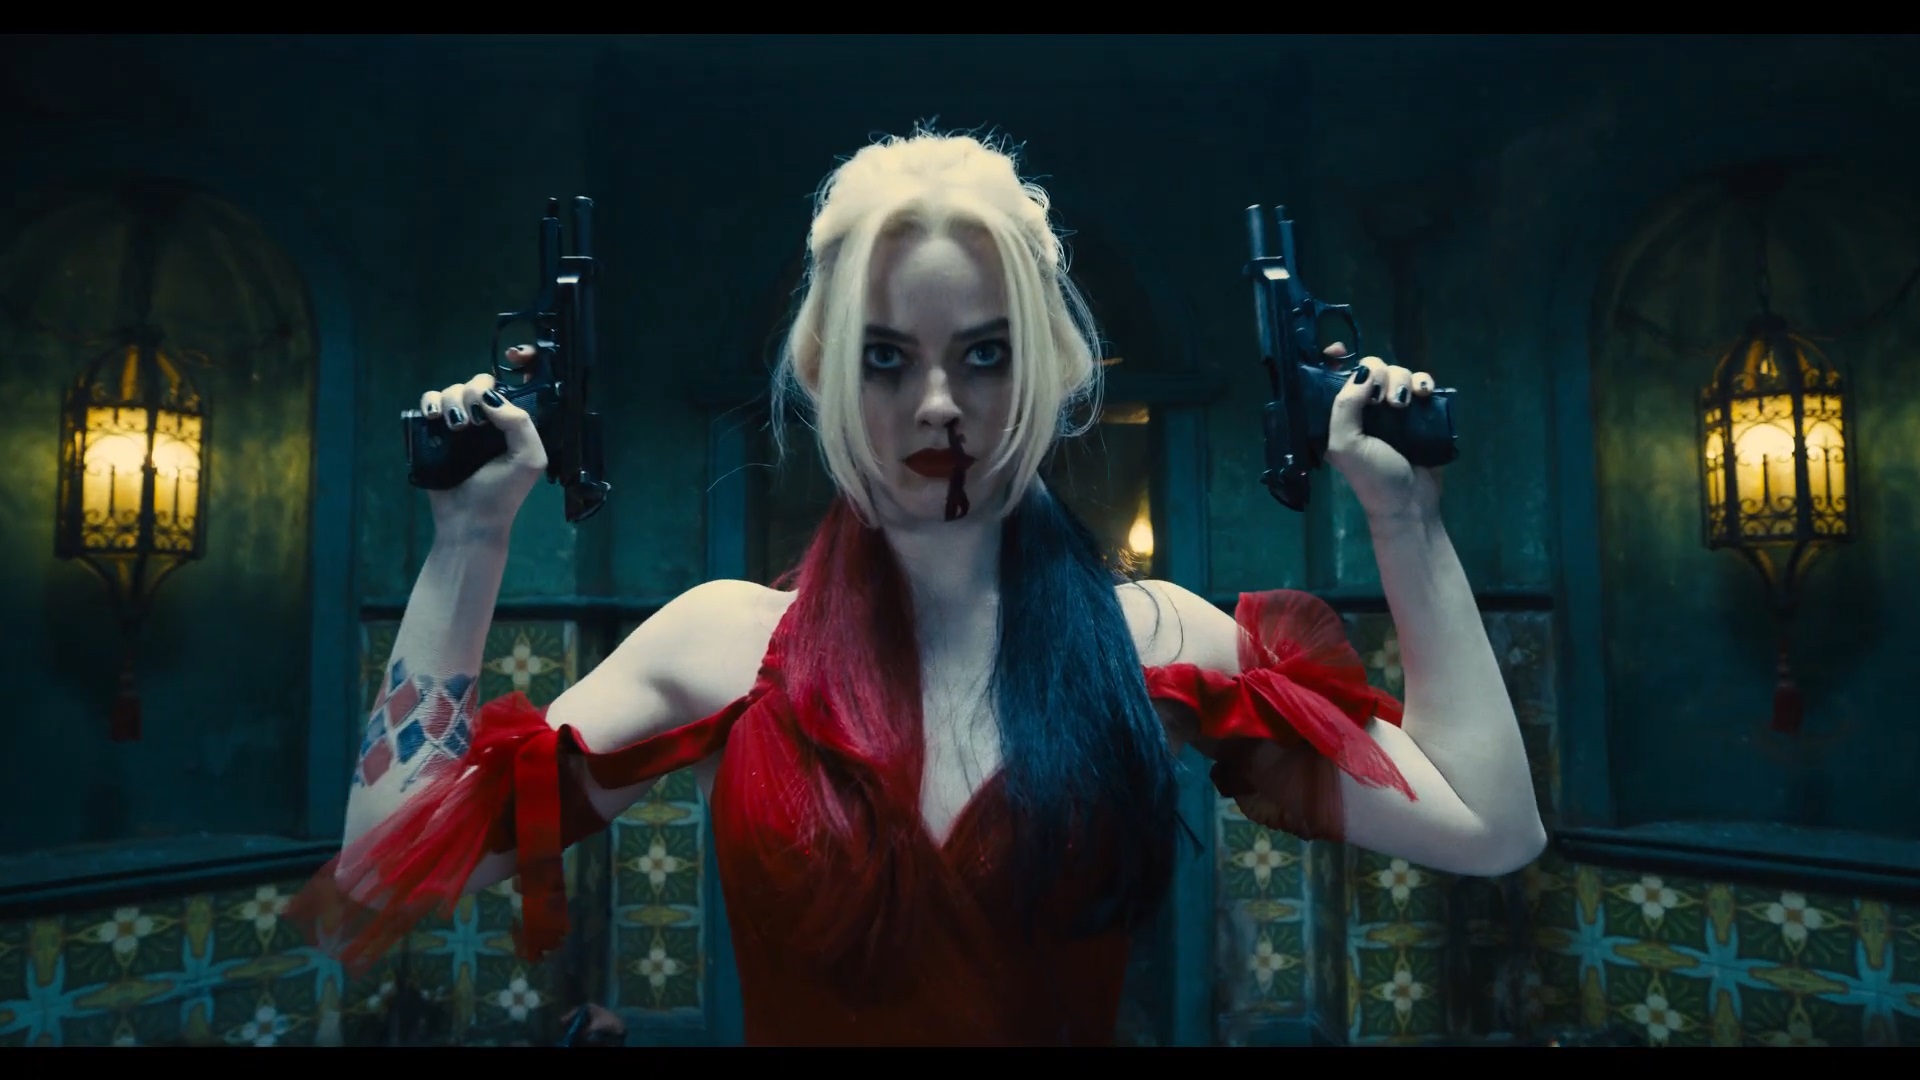 How 'Suicide Squad' Messed Up Harley Quinn